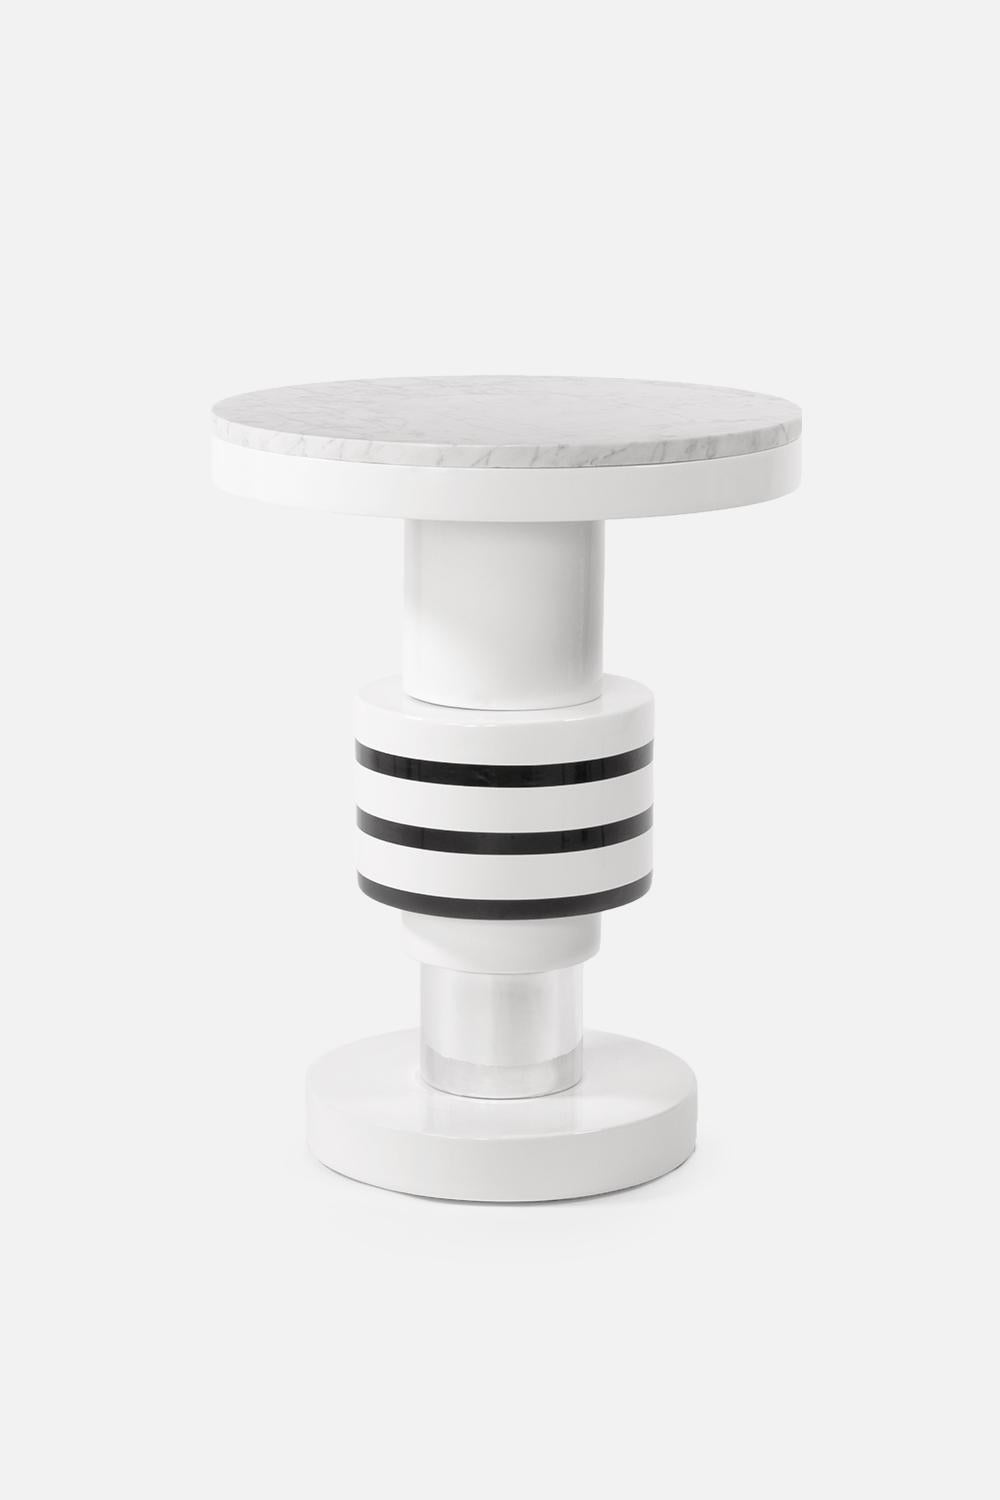 Ceramic and marble side table by Eric Willemart

Materials: Polished Carrara marble plate embedded in a white lacquered wooden tray.
Body materials: Handcrafted ceramic glazed in black, white and silver finishes.
Base materials: White lacquered